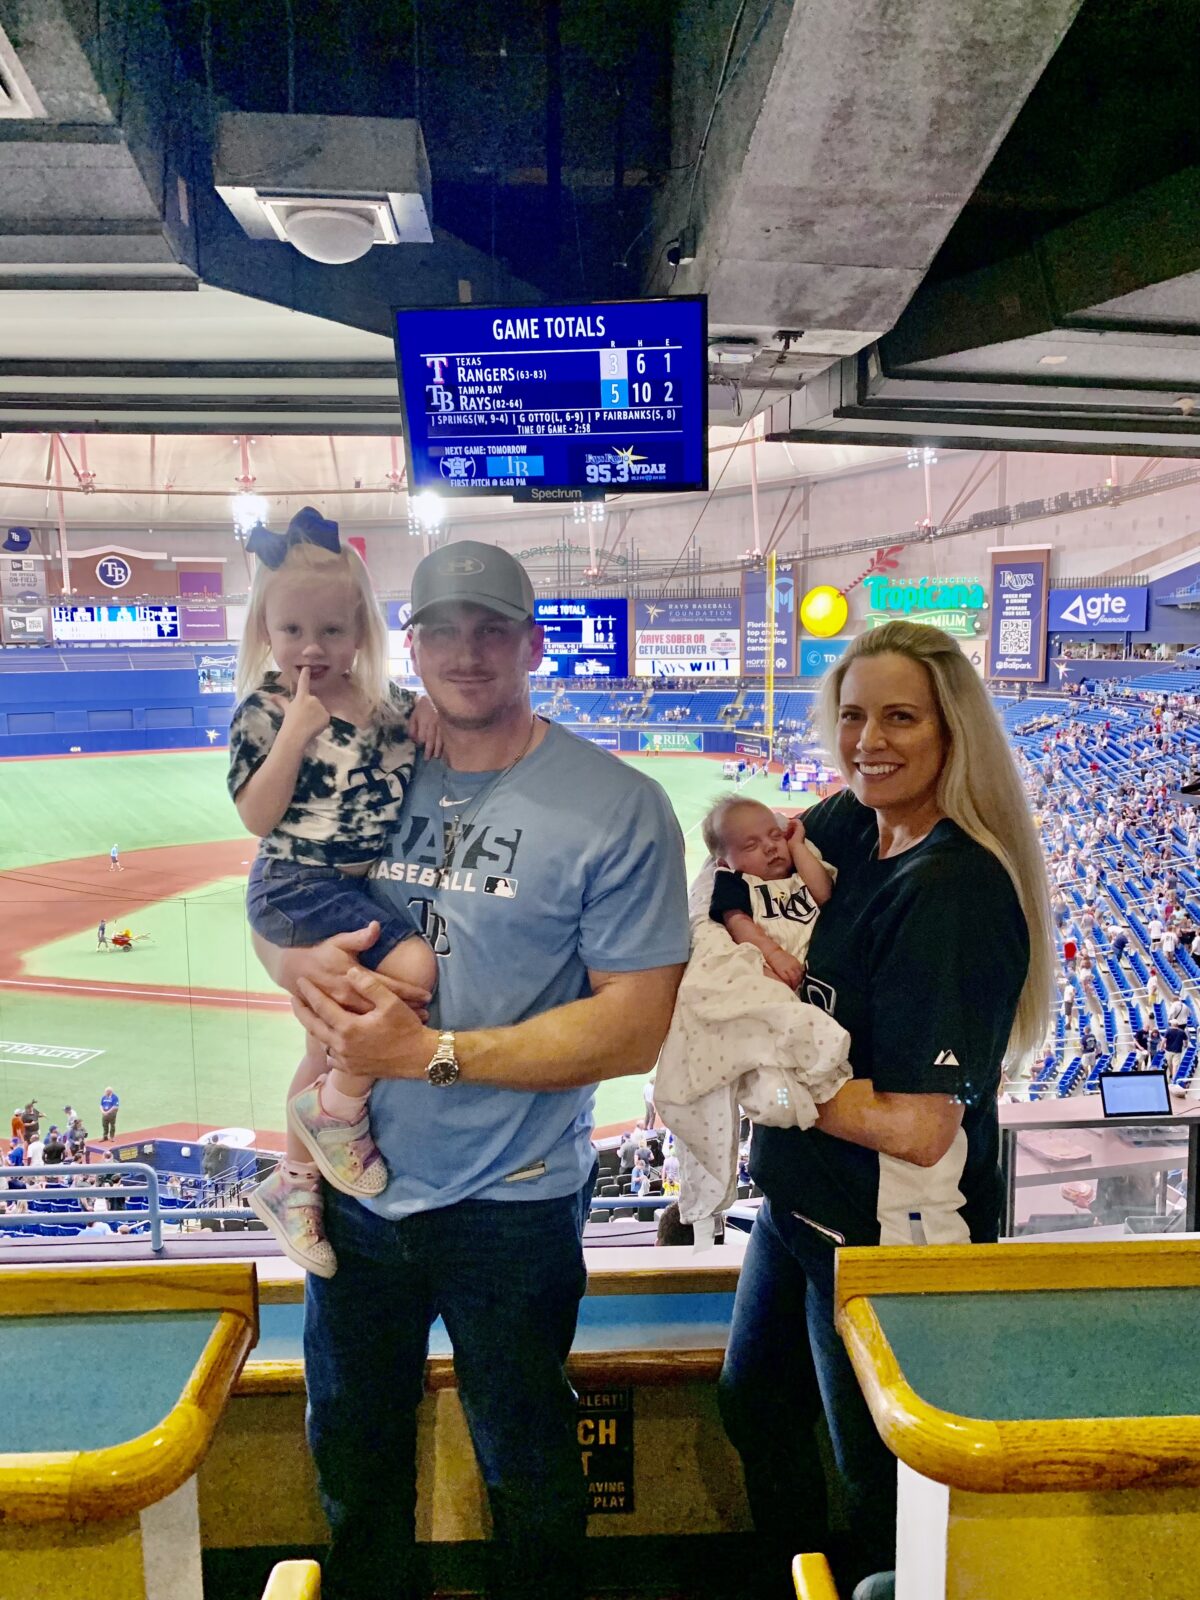 Brittany Lincicome throws first pitch at Rays game, makes plans to return to LPGA near Florida home after birth of second child